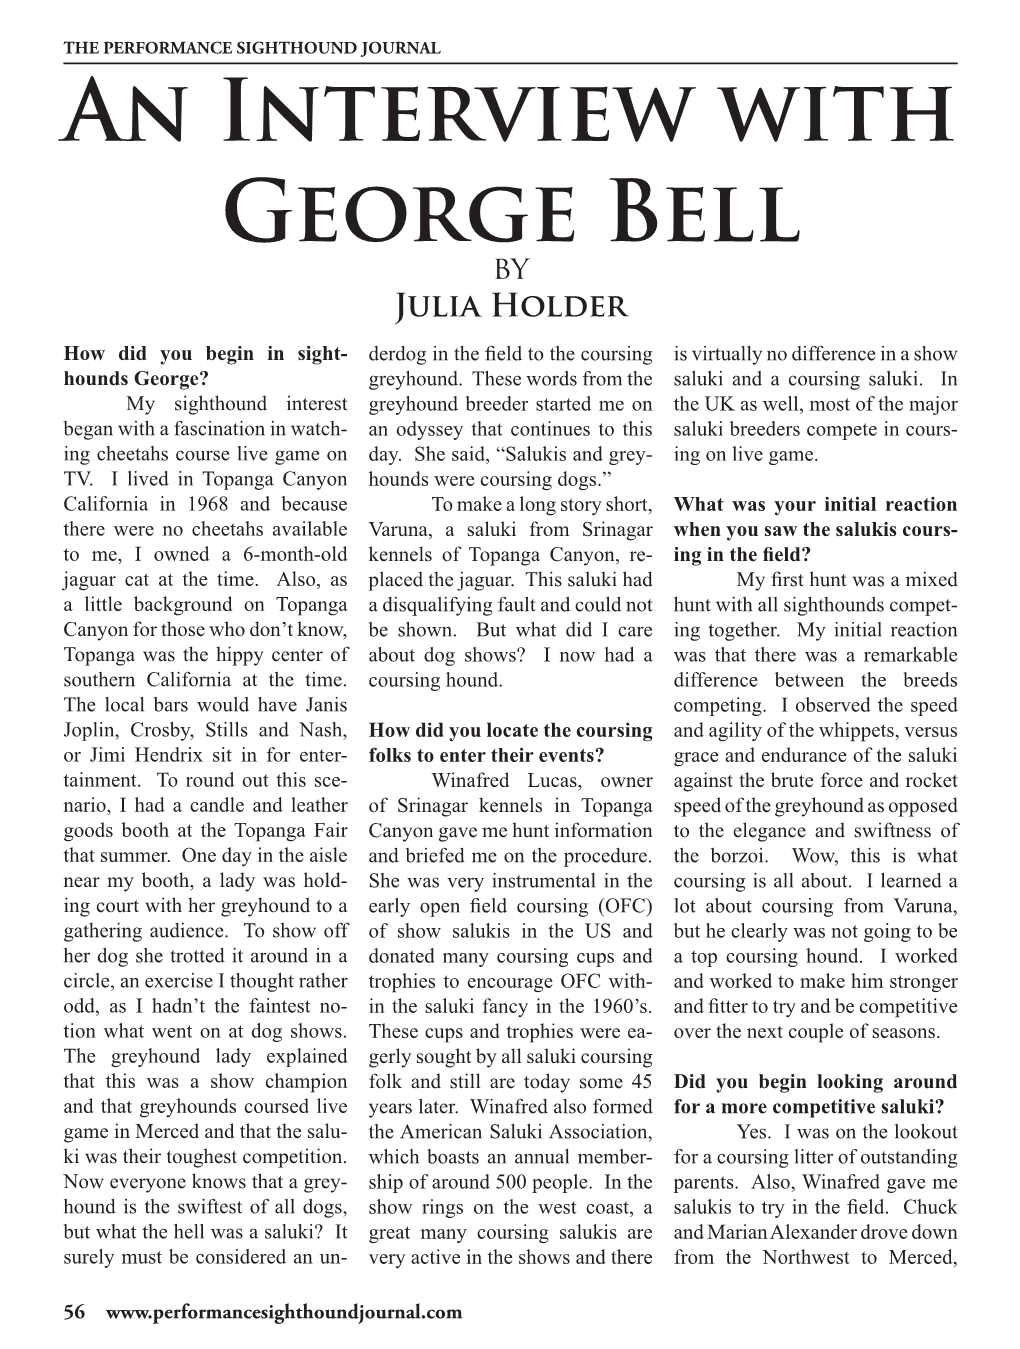 An Interview with George Bell